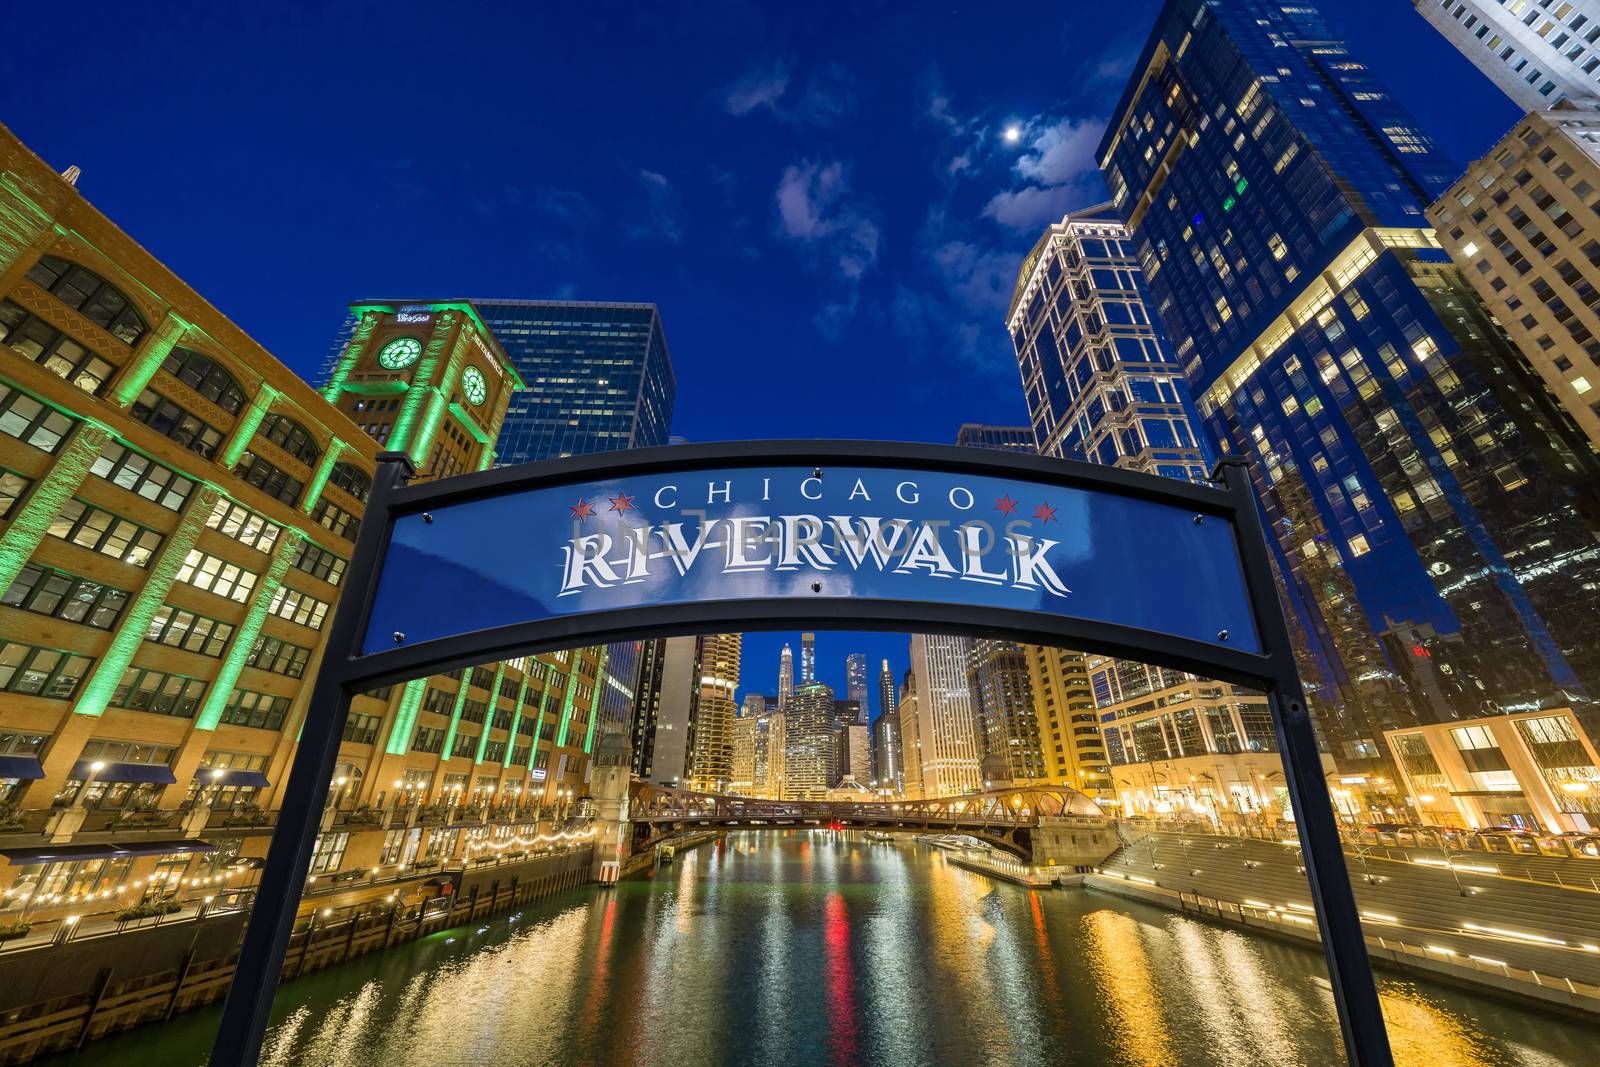 The landmark Chicago riverwalk label over cityscape river side, by Tzido